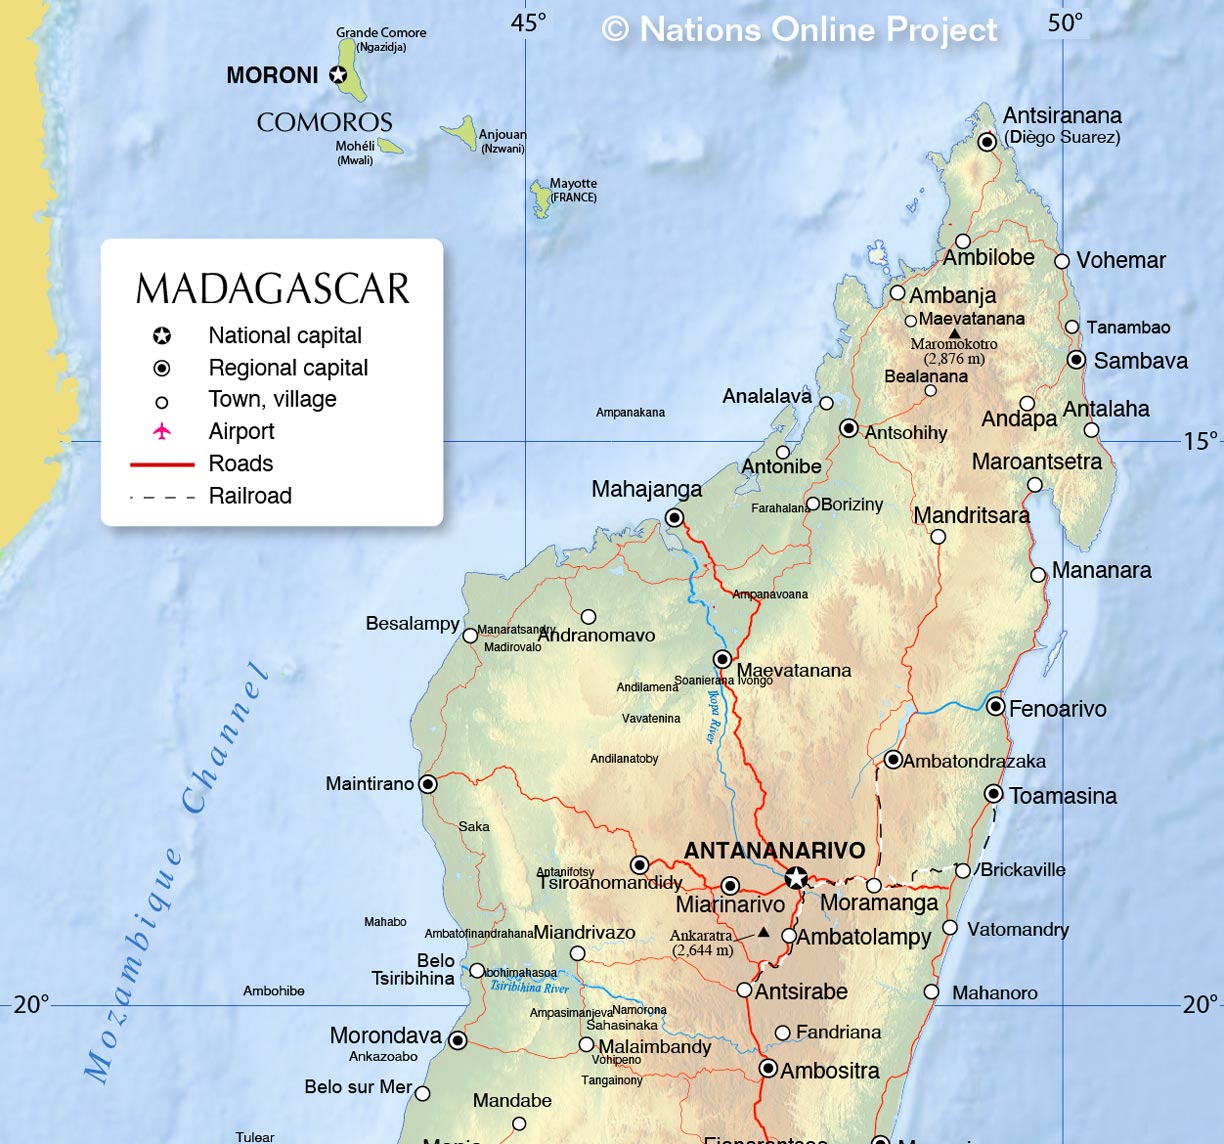 Madagascar Country Profile - National Geographic Kids